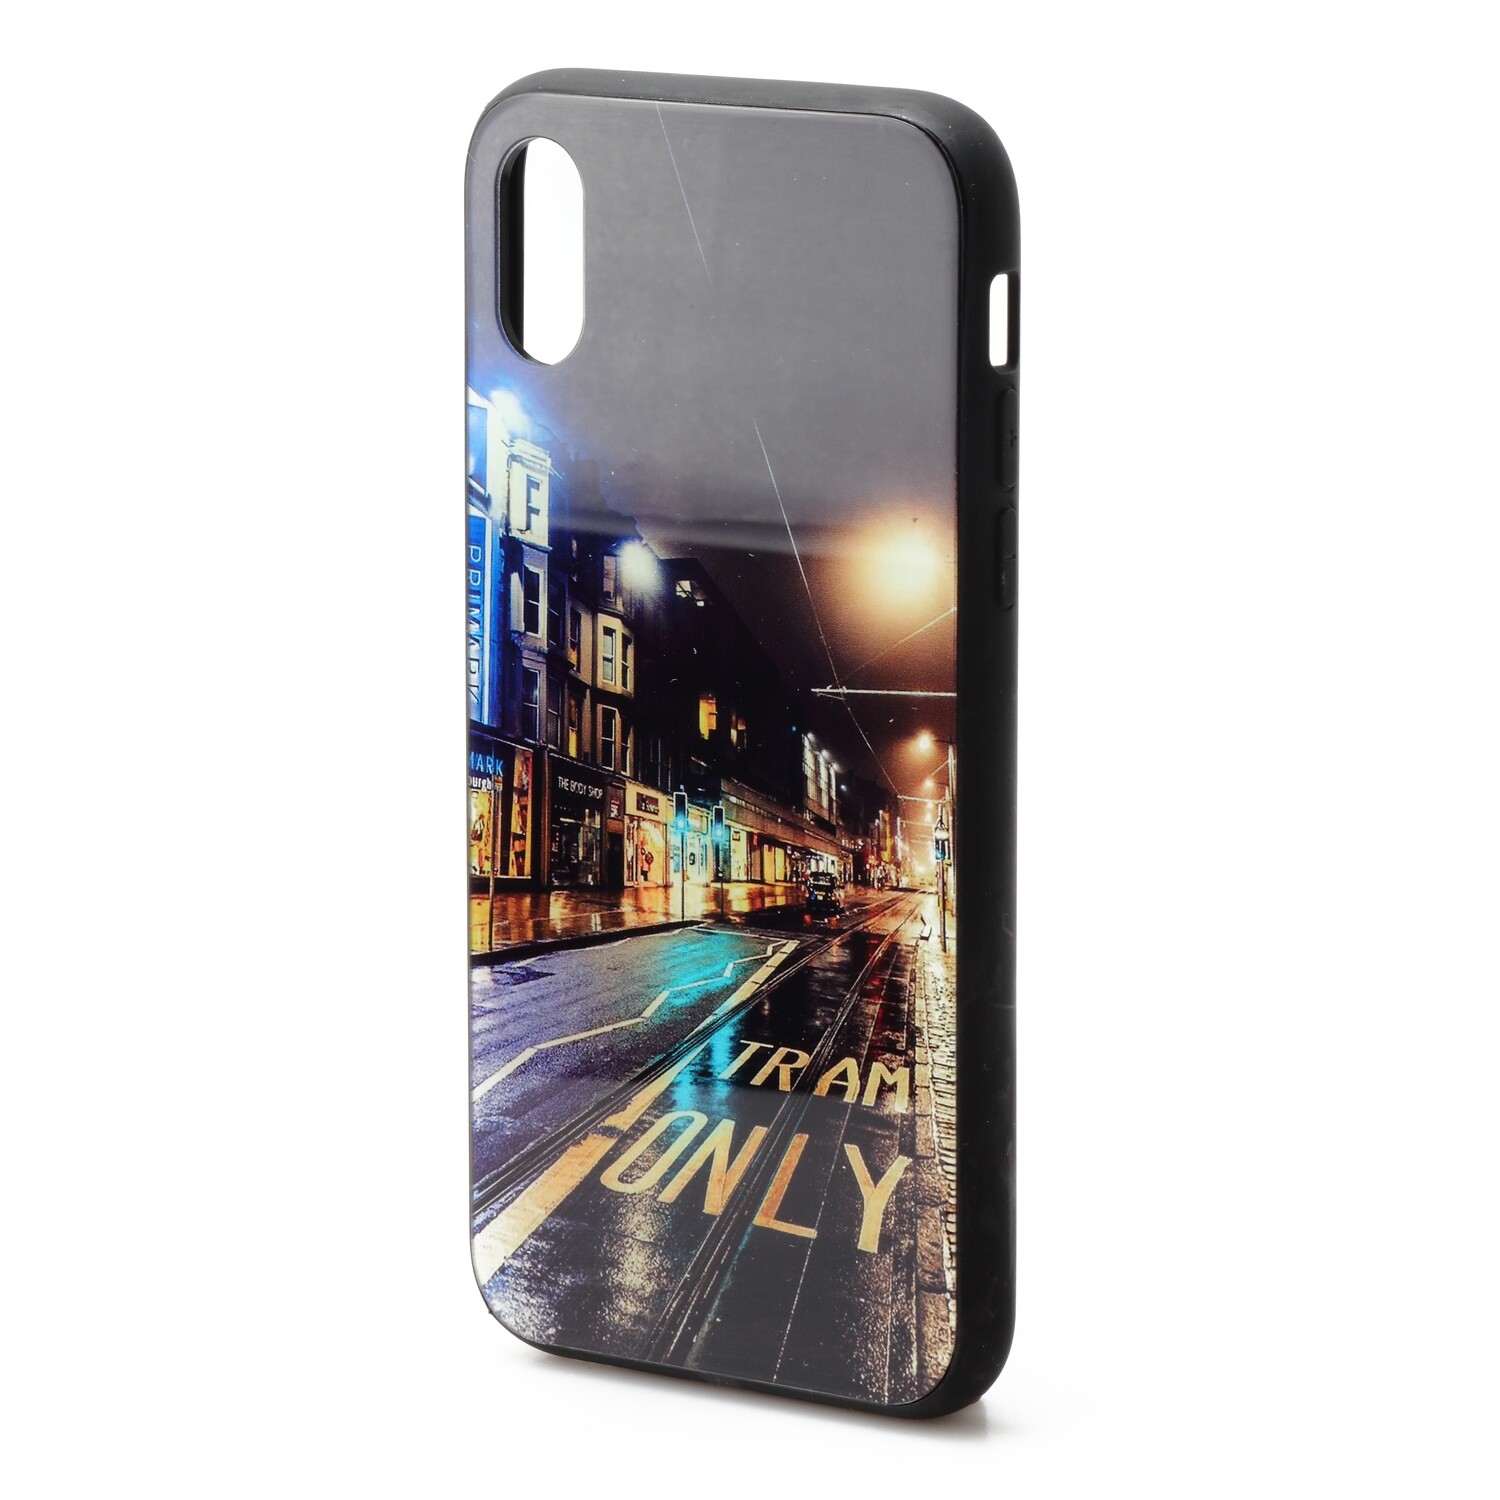 iPhone X / Xs 5.8 Printed Hard Back Case, Pattern: Nights Road